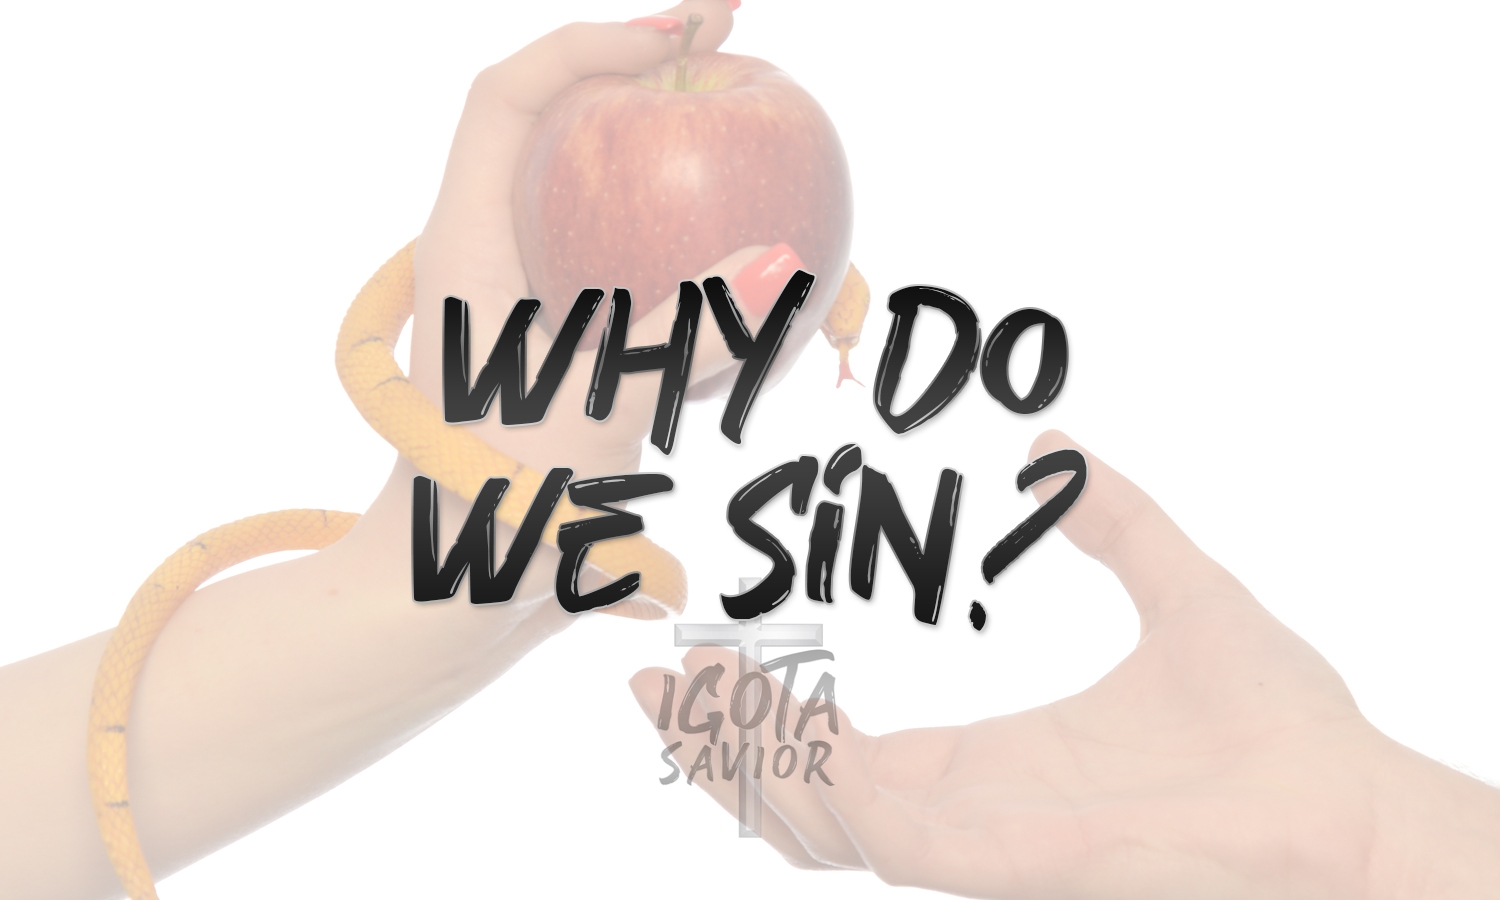 Why Do We Sin?